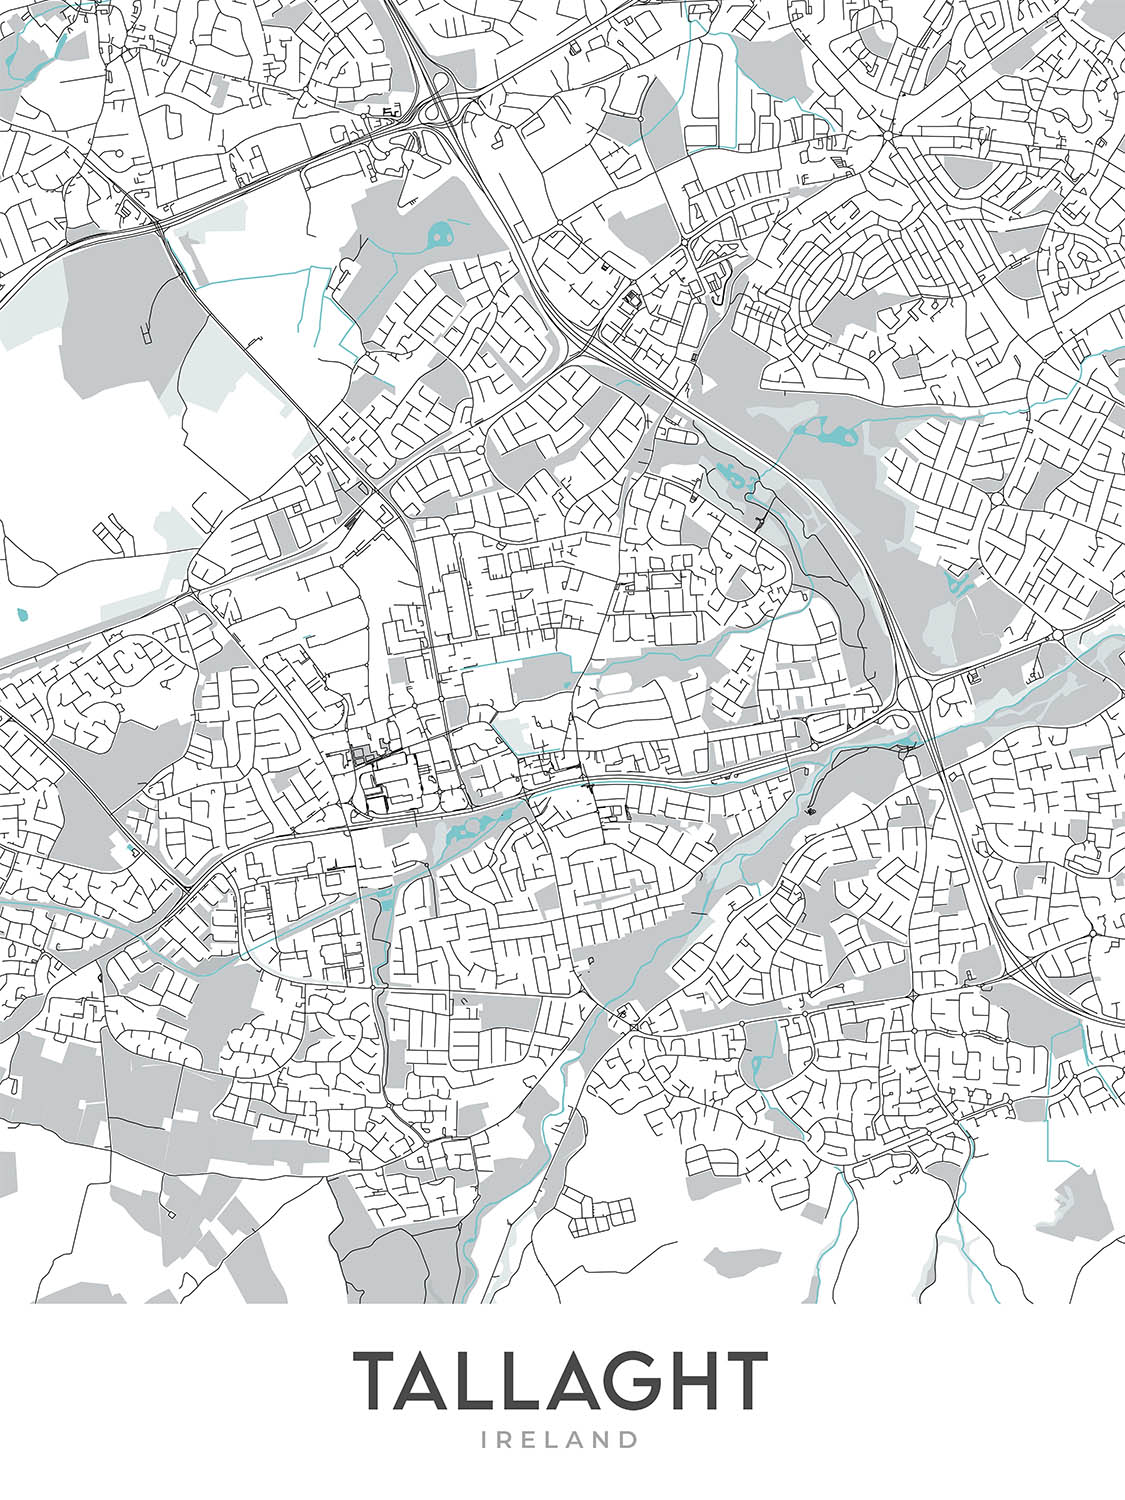 Modern City Map of Tallaght, Ireland: Tallaght Stadium, The Square, Tallaght Hospital, M50 Motorway, N81 National Route